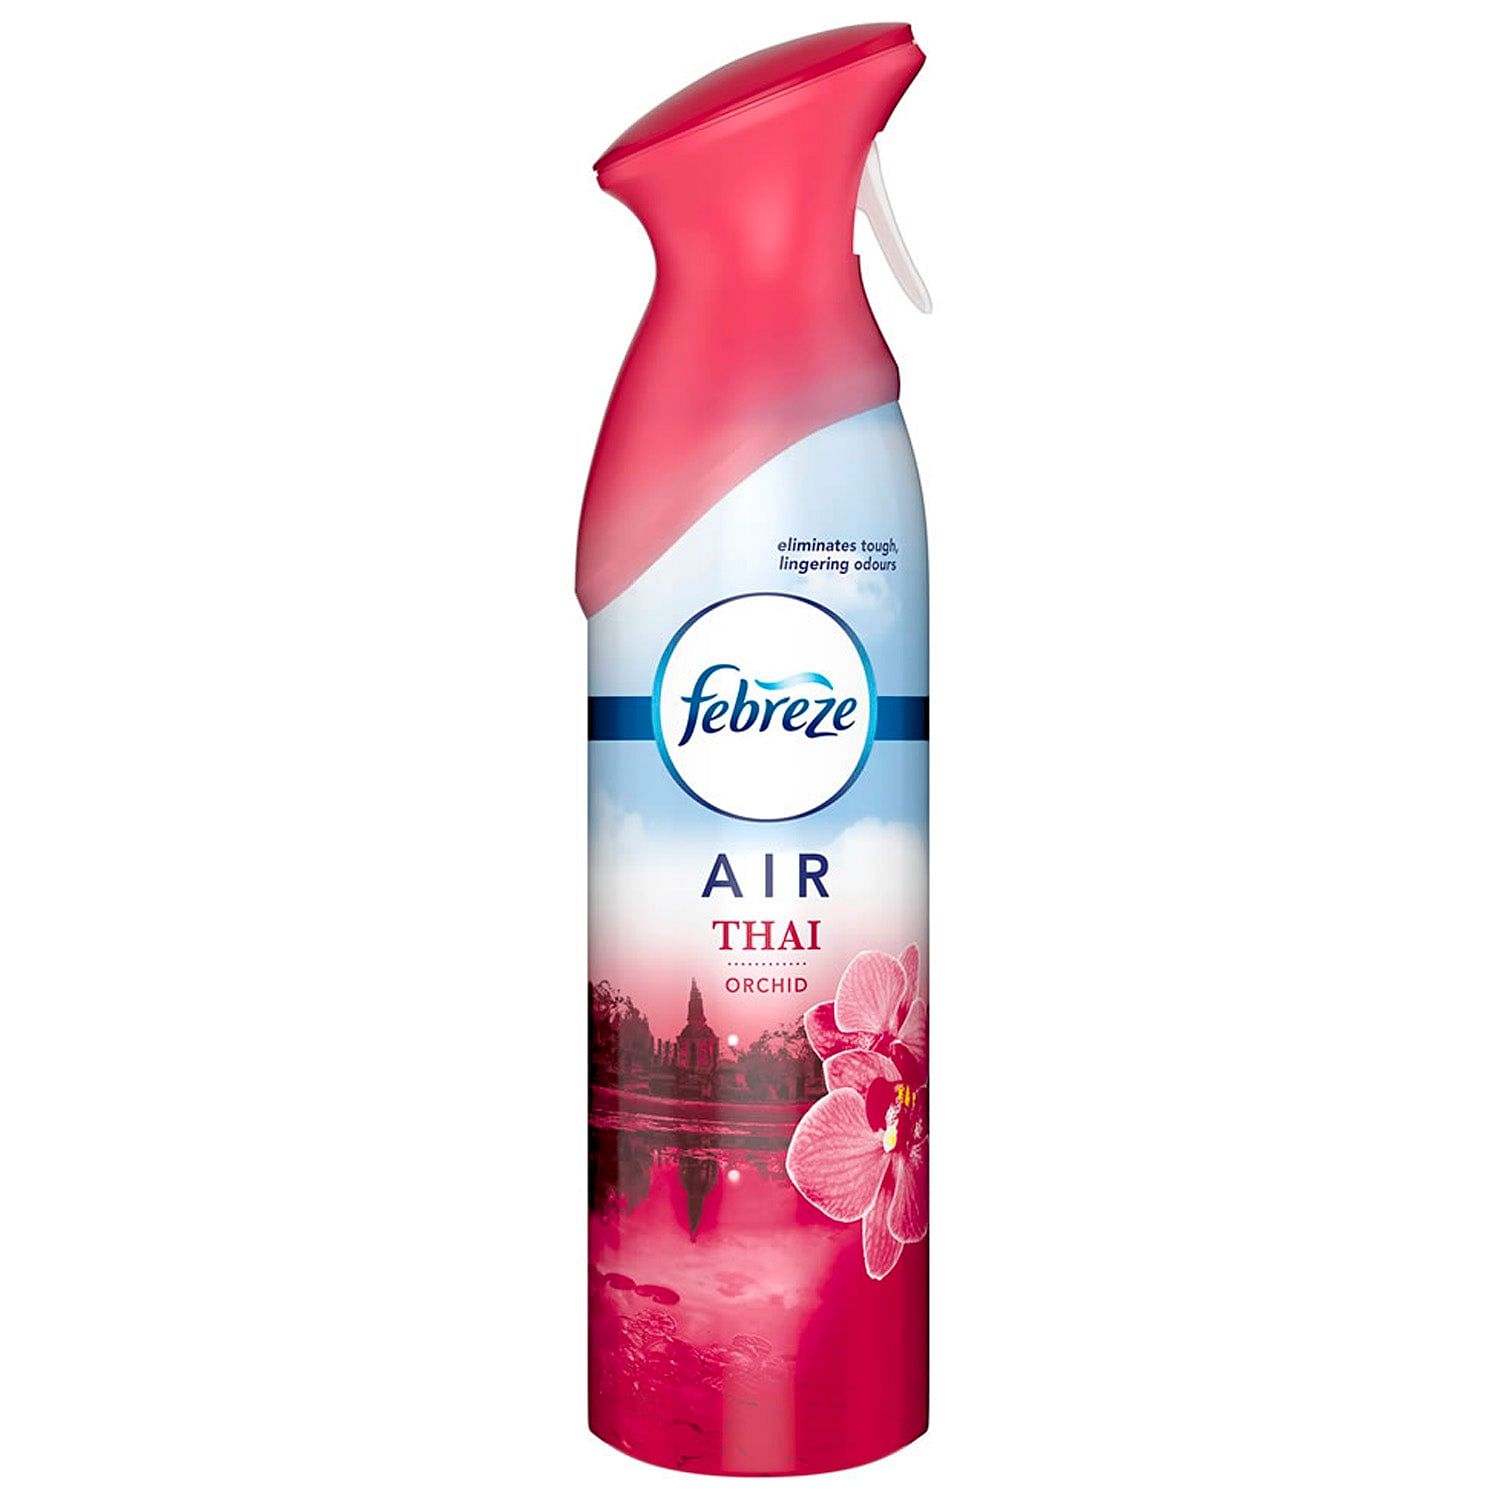 Febreze Air Refesher Spray, Thai Orchid Scent, 300 ml (Pack of 6)